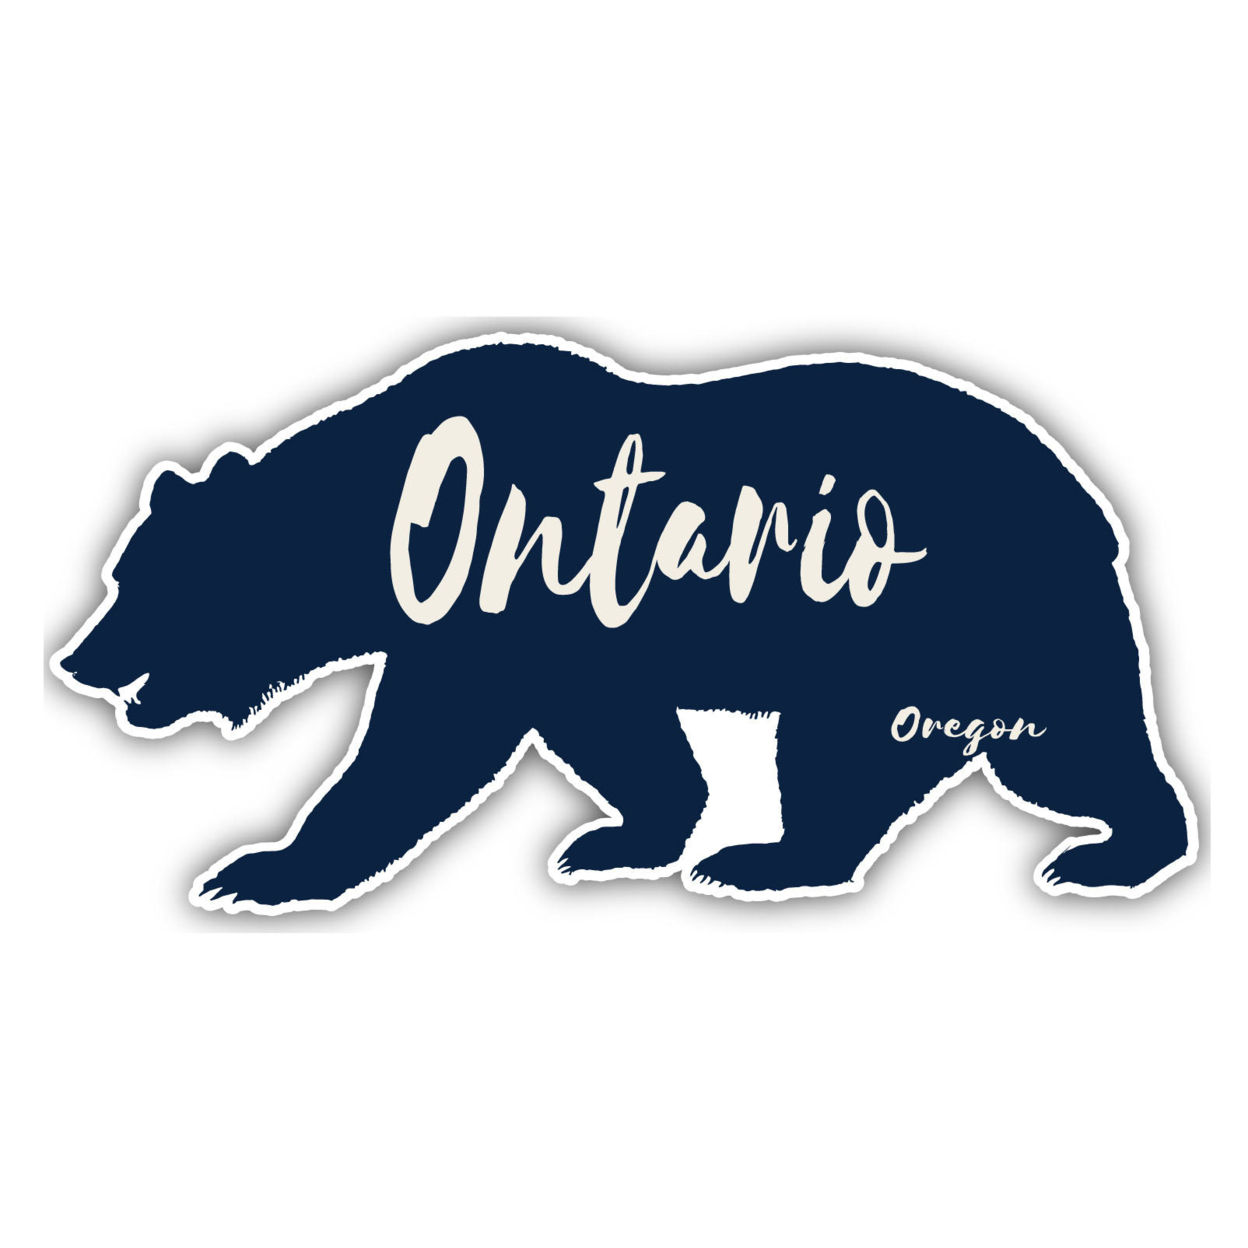 Ontario Oregon Souvenir Decorative Stickers (Choose Theme And Size) - Single Unit, 2-Inch, Great Outdoors